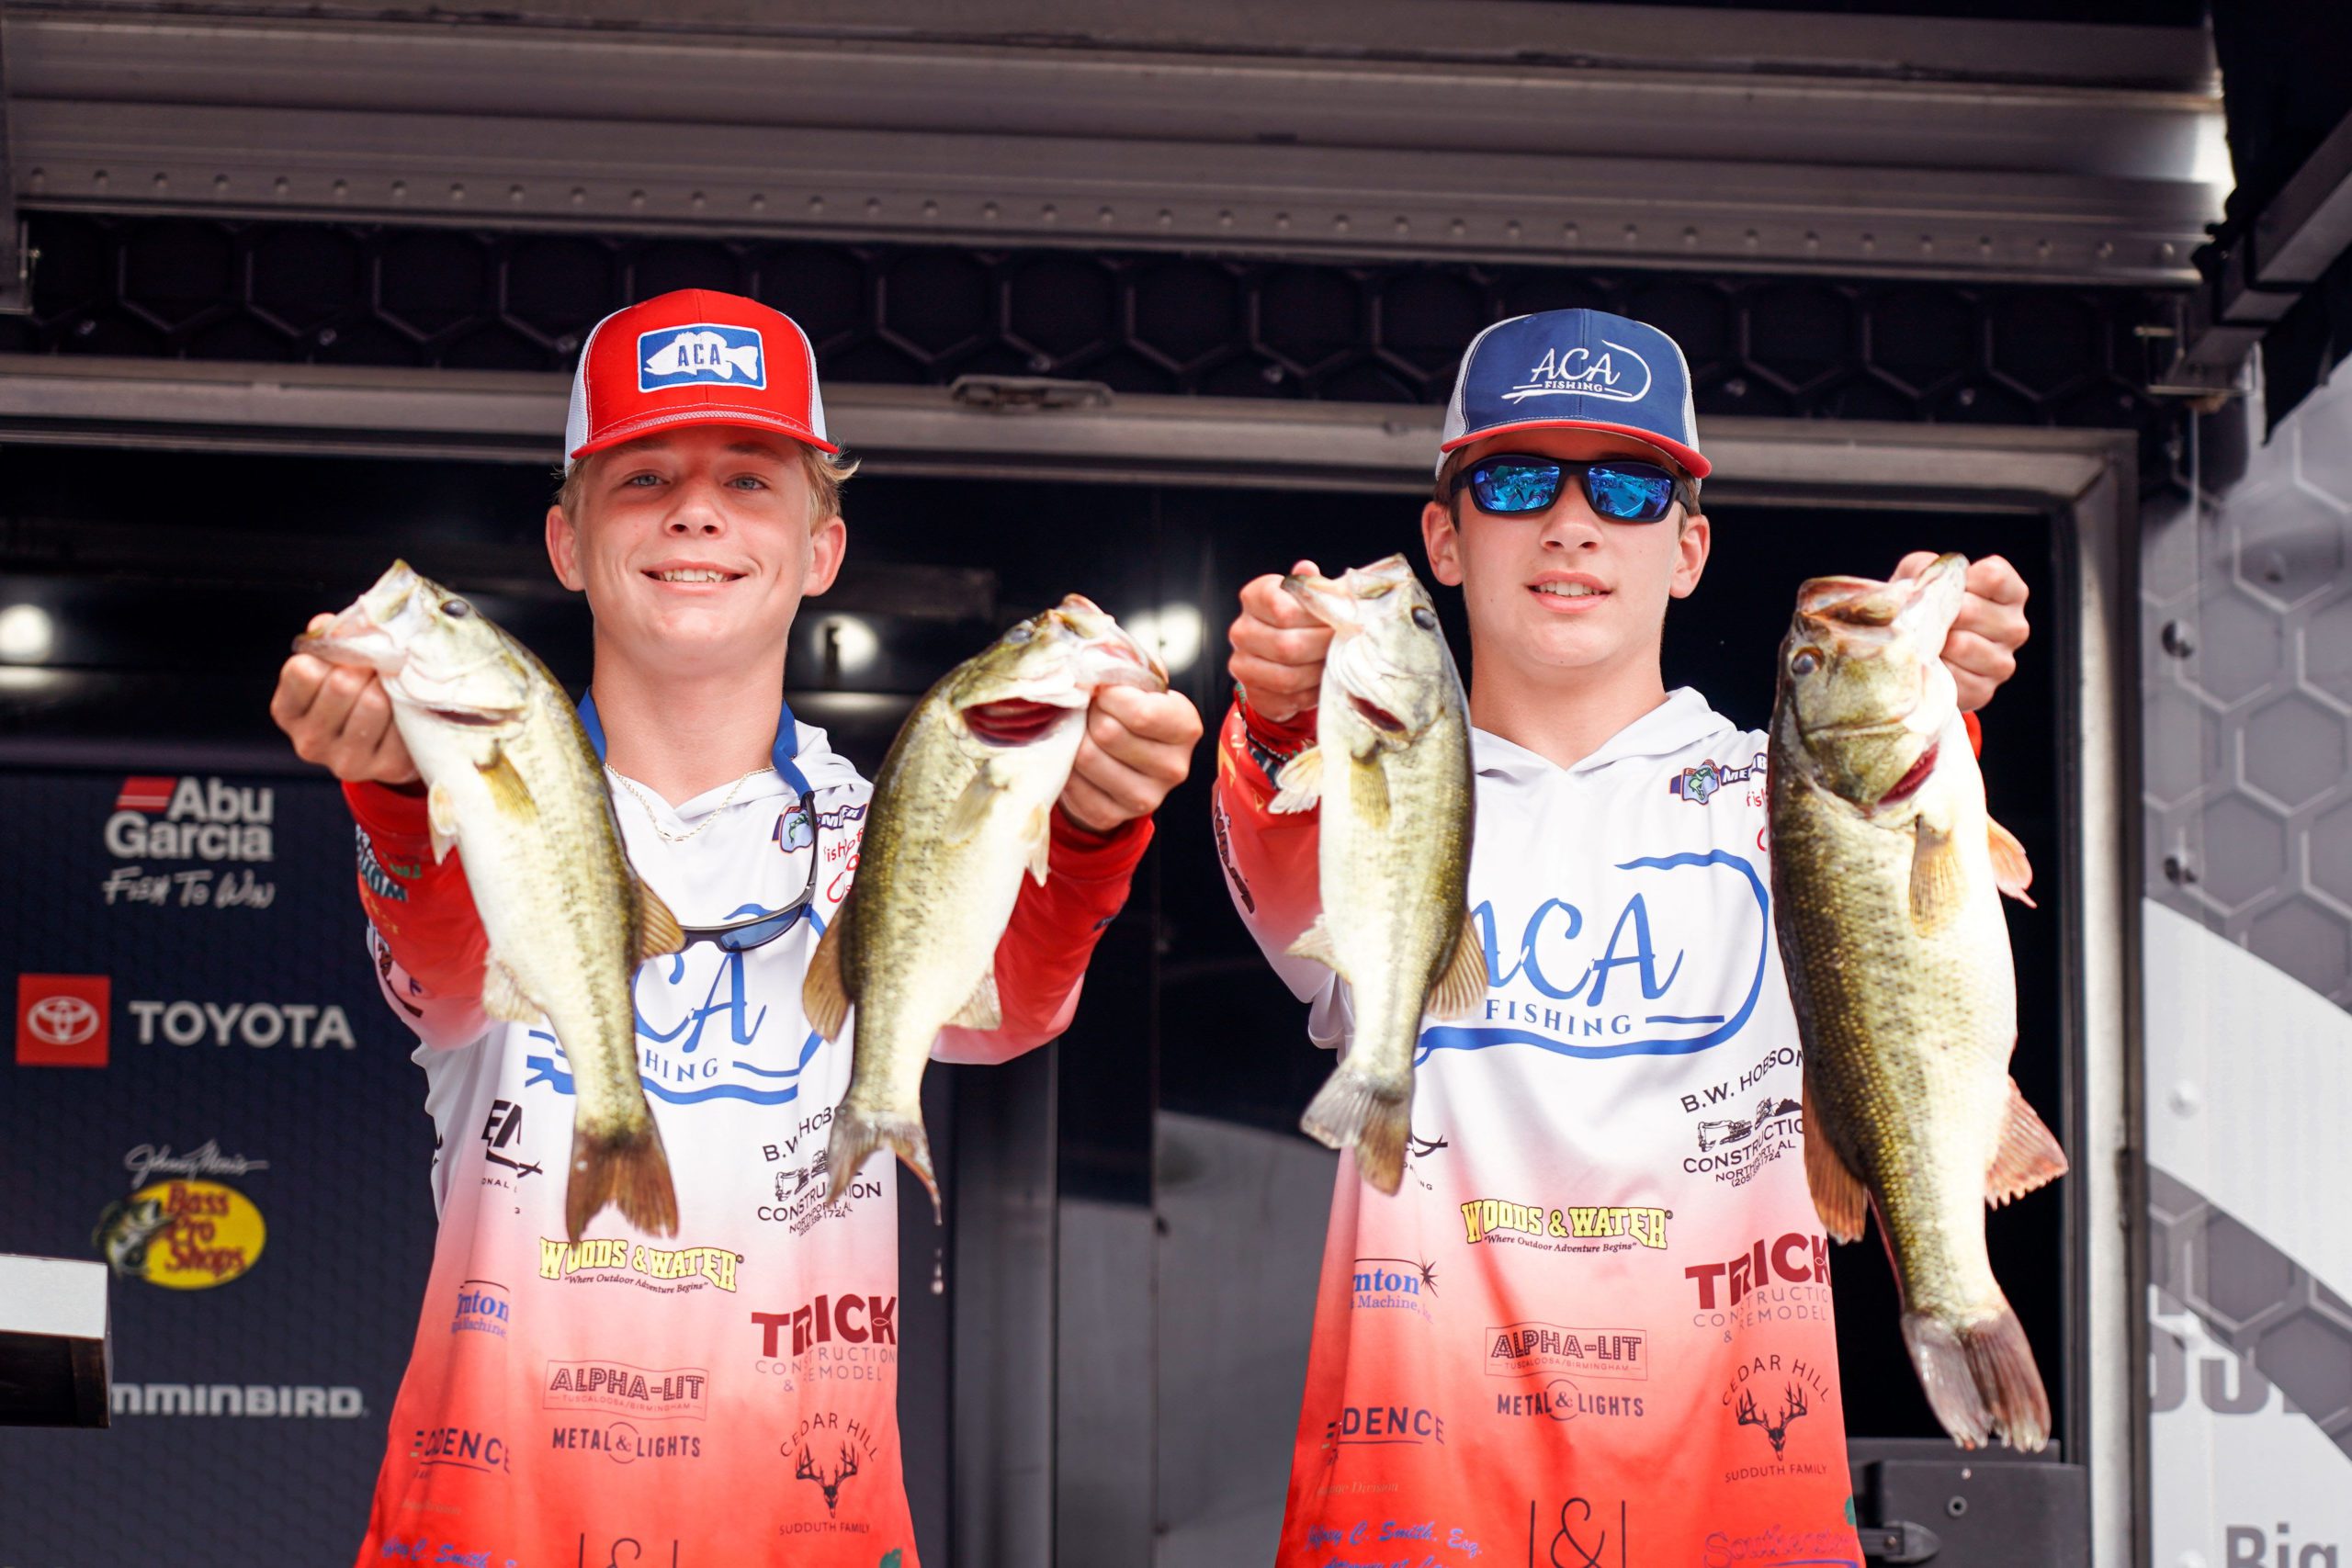 Gordon, Deason Capitalize On Early Opportunity For Junior National Championship Lead